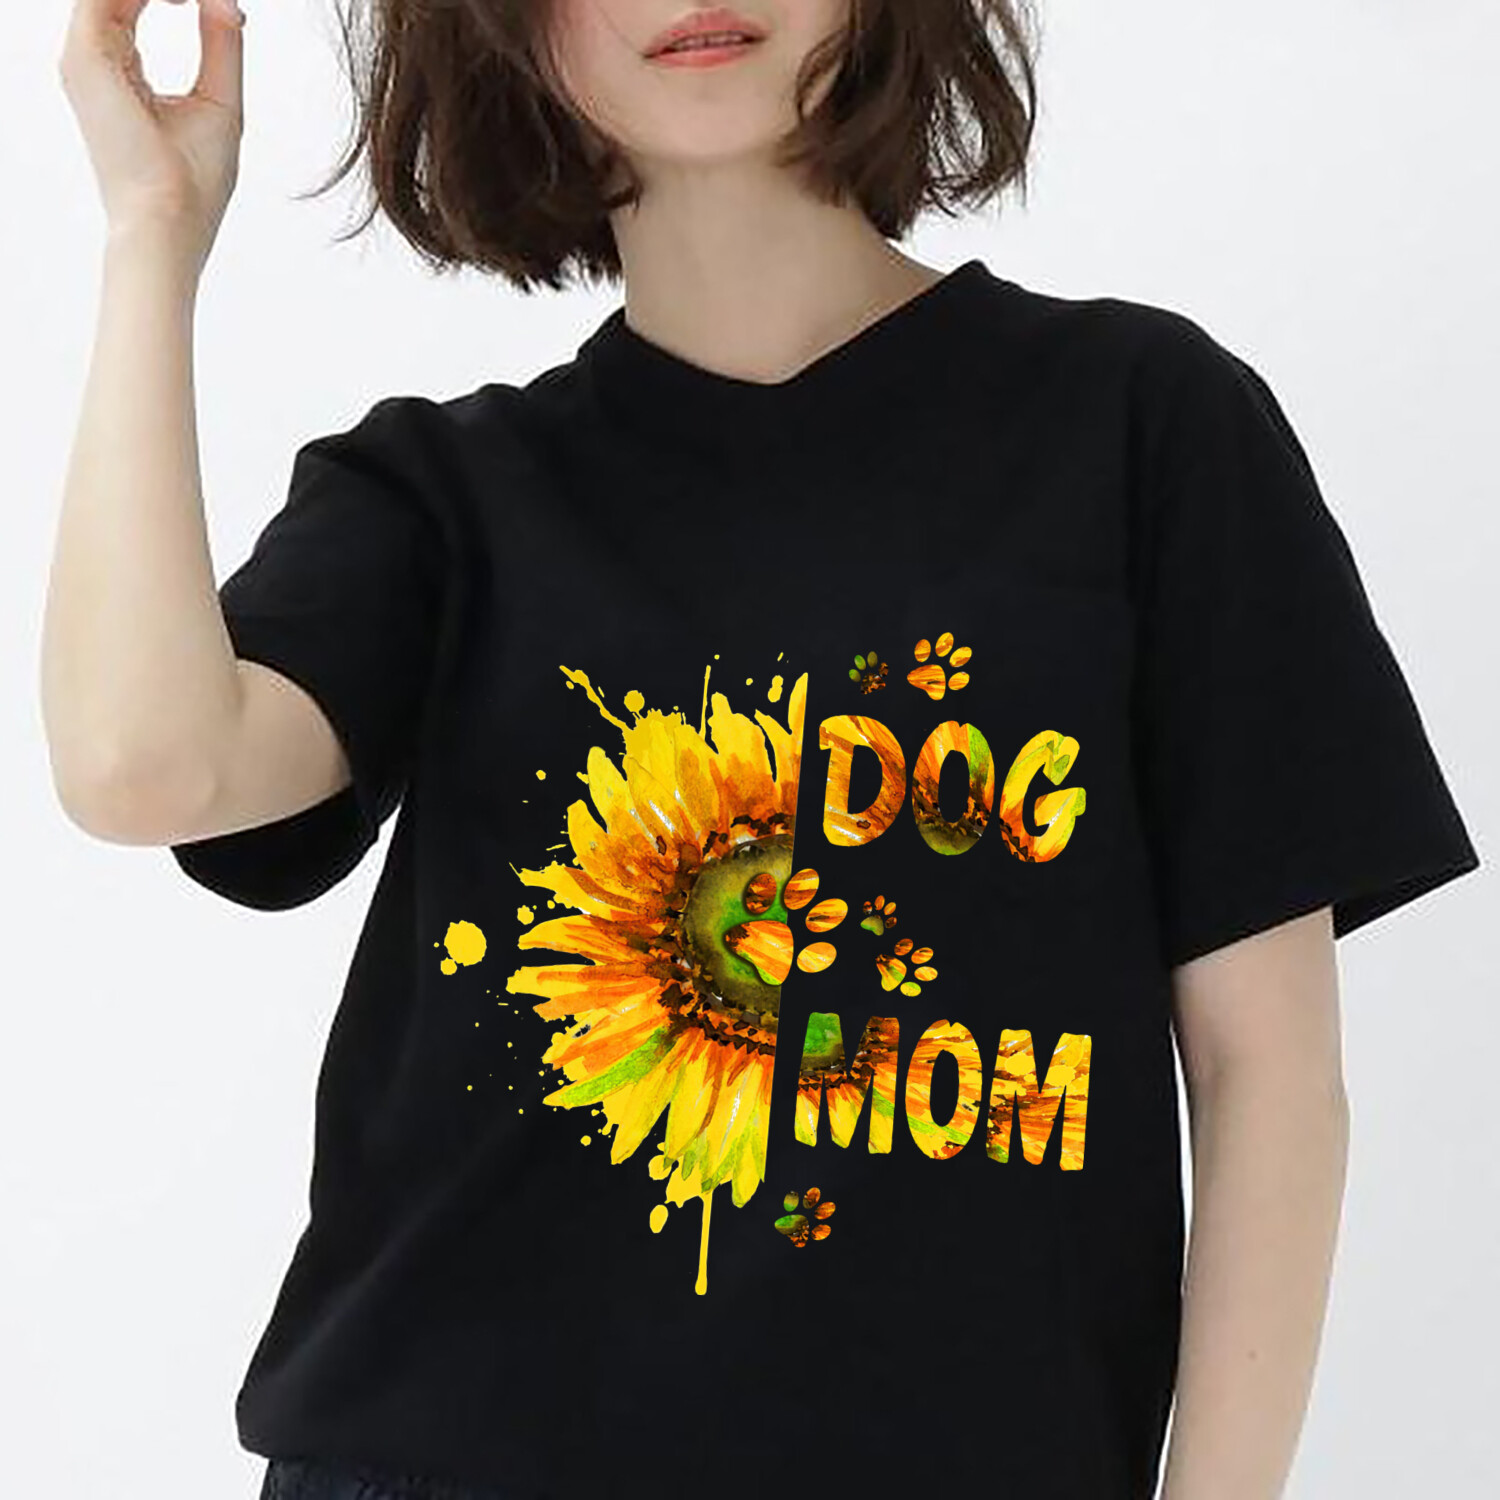 Dog Mom Shirt, Dog Mom Sunflower T-shirt Pet Lover Tee Gift for Dog Owner Funny Dog Shirt Mother's Day Gift For Women Mommy Grandma Aunt Unisex T shirt, Hoodie, Sweatshirt All size